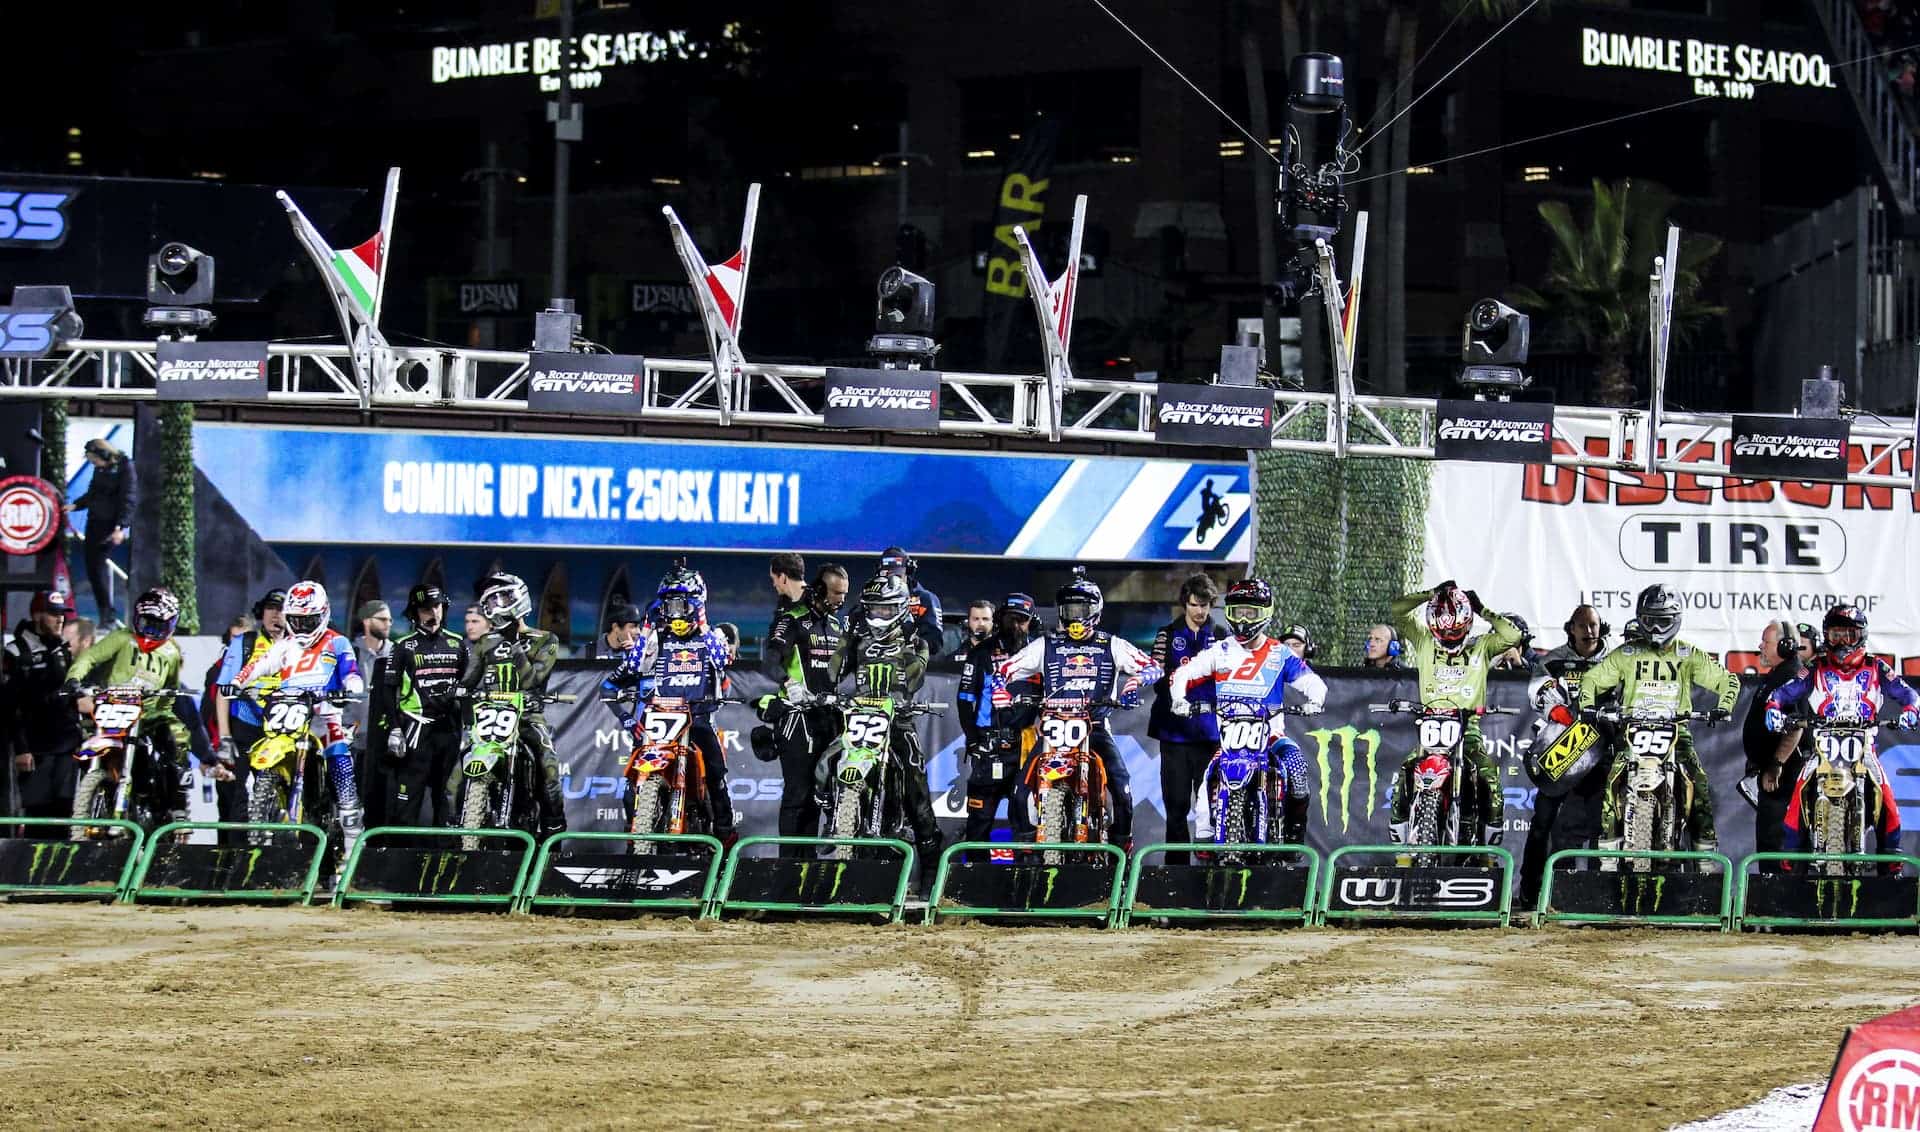 FIM bans Russian riders from competing in American AMA Supercross and Motocross.